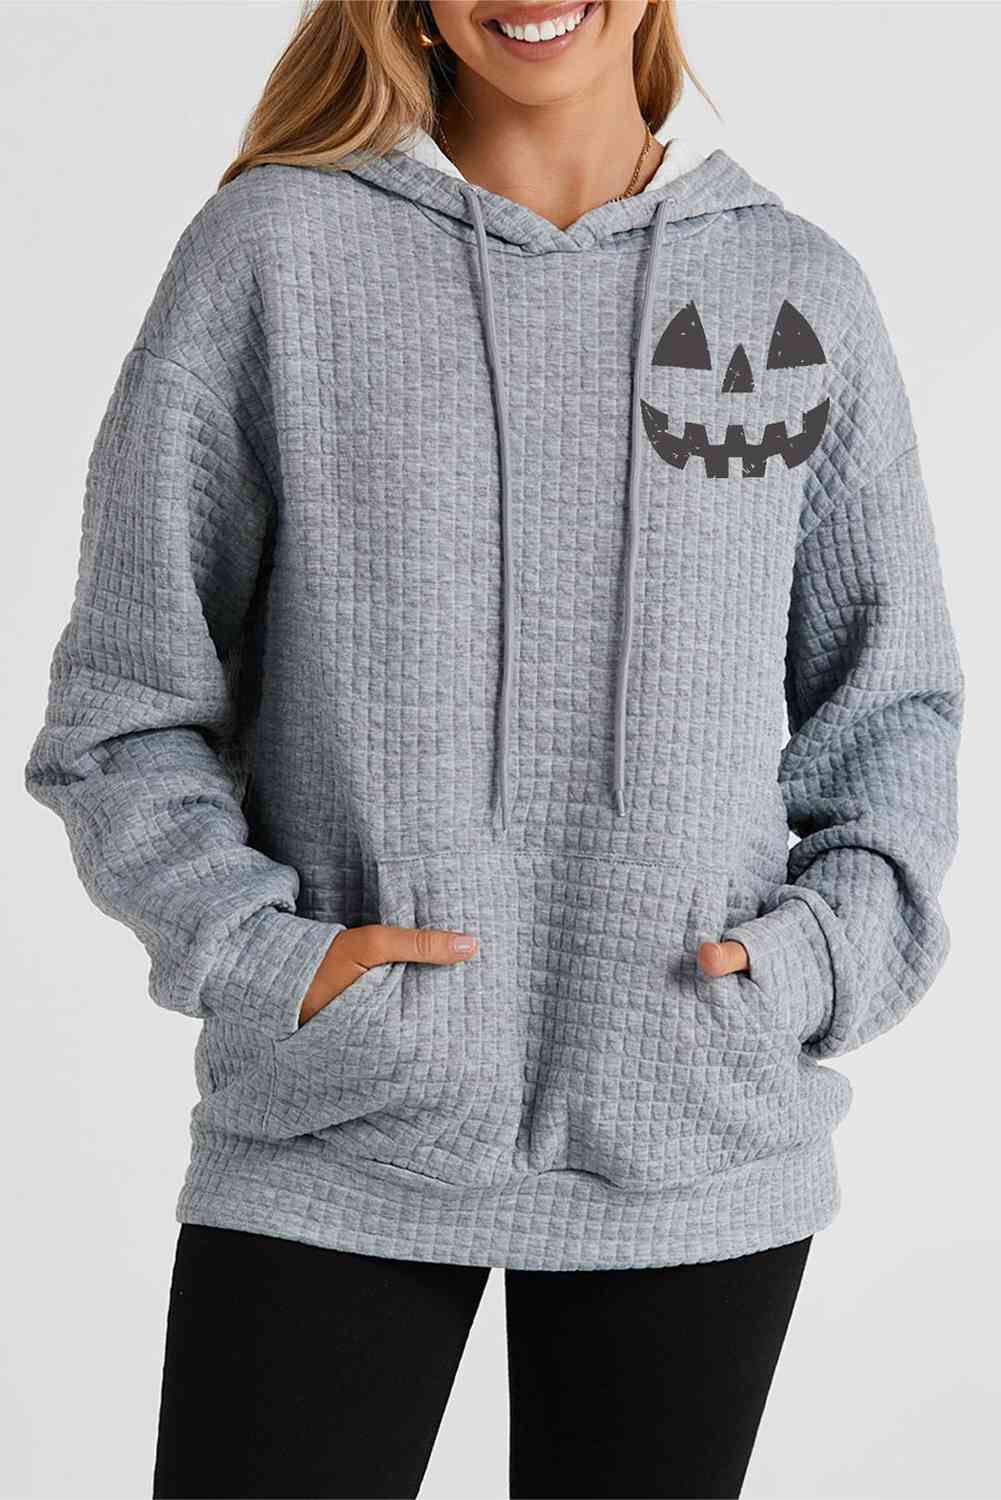 Women's Pumpkin Face Graphic Drawstring Hoodie with Pocket Charcoal